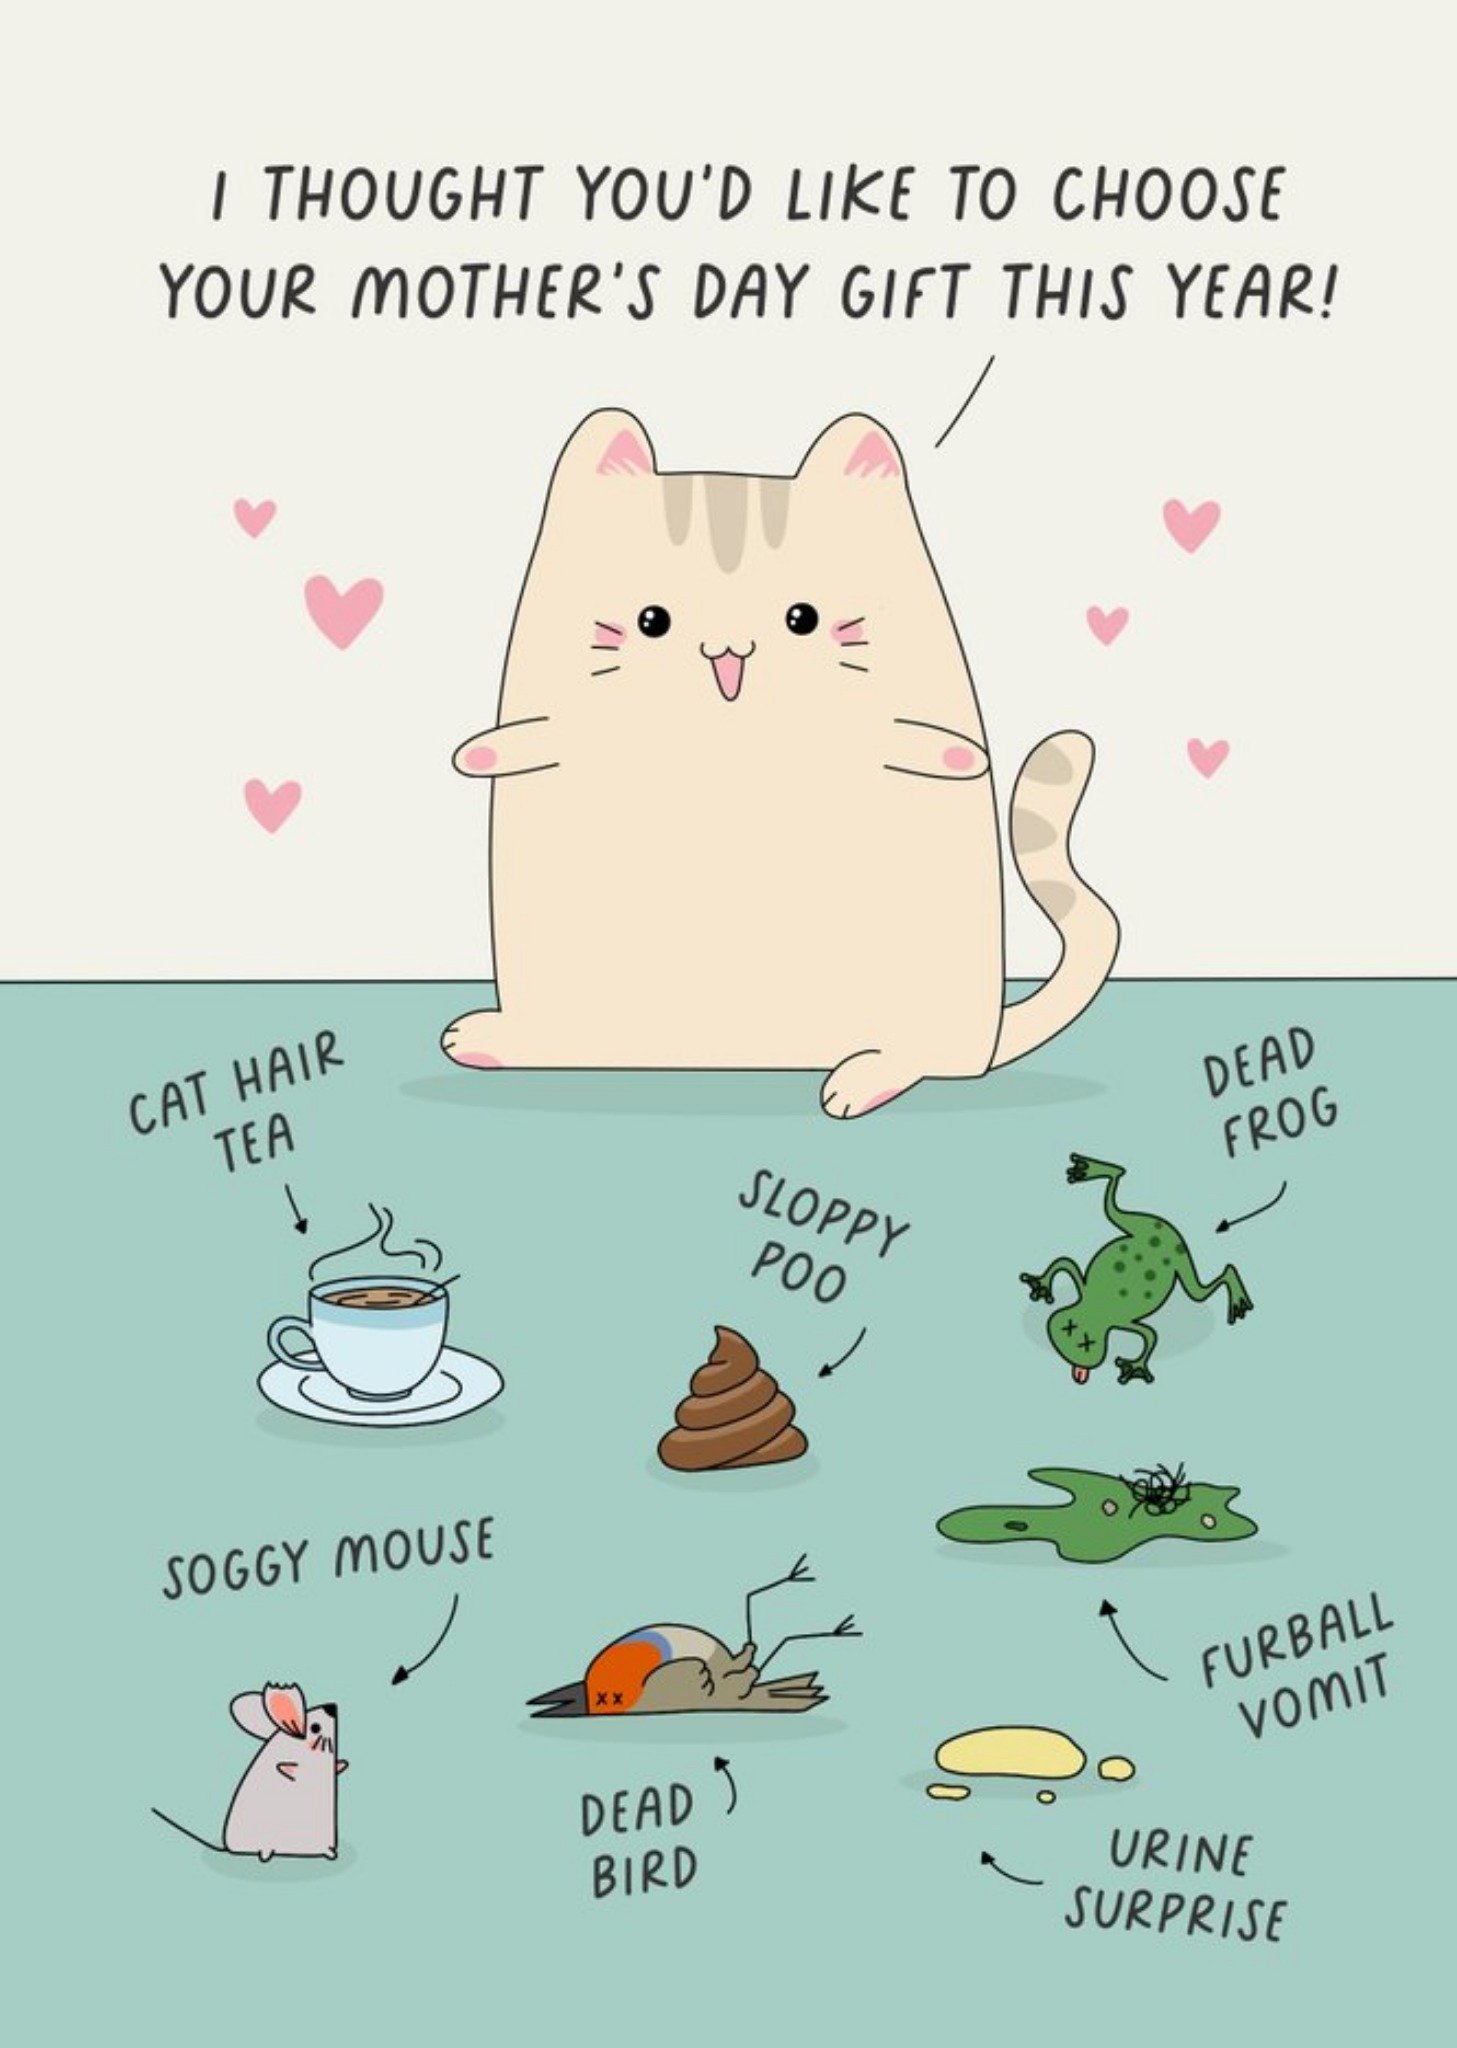 Moonpig Anime Themed Illustration Of A Cute Cat With Unpleasant Gifts Mother's Day Card Ecard